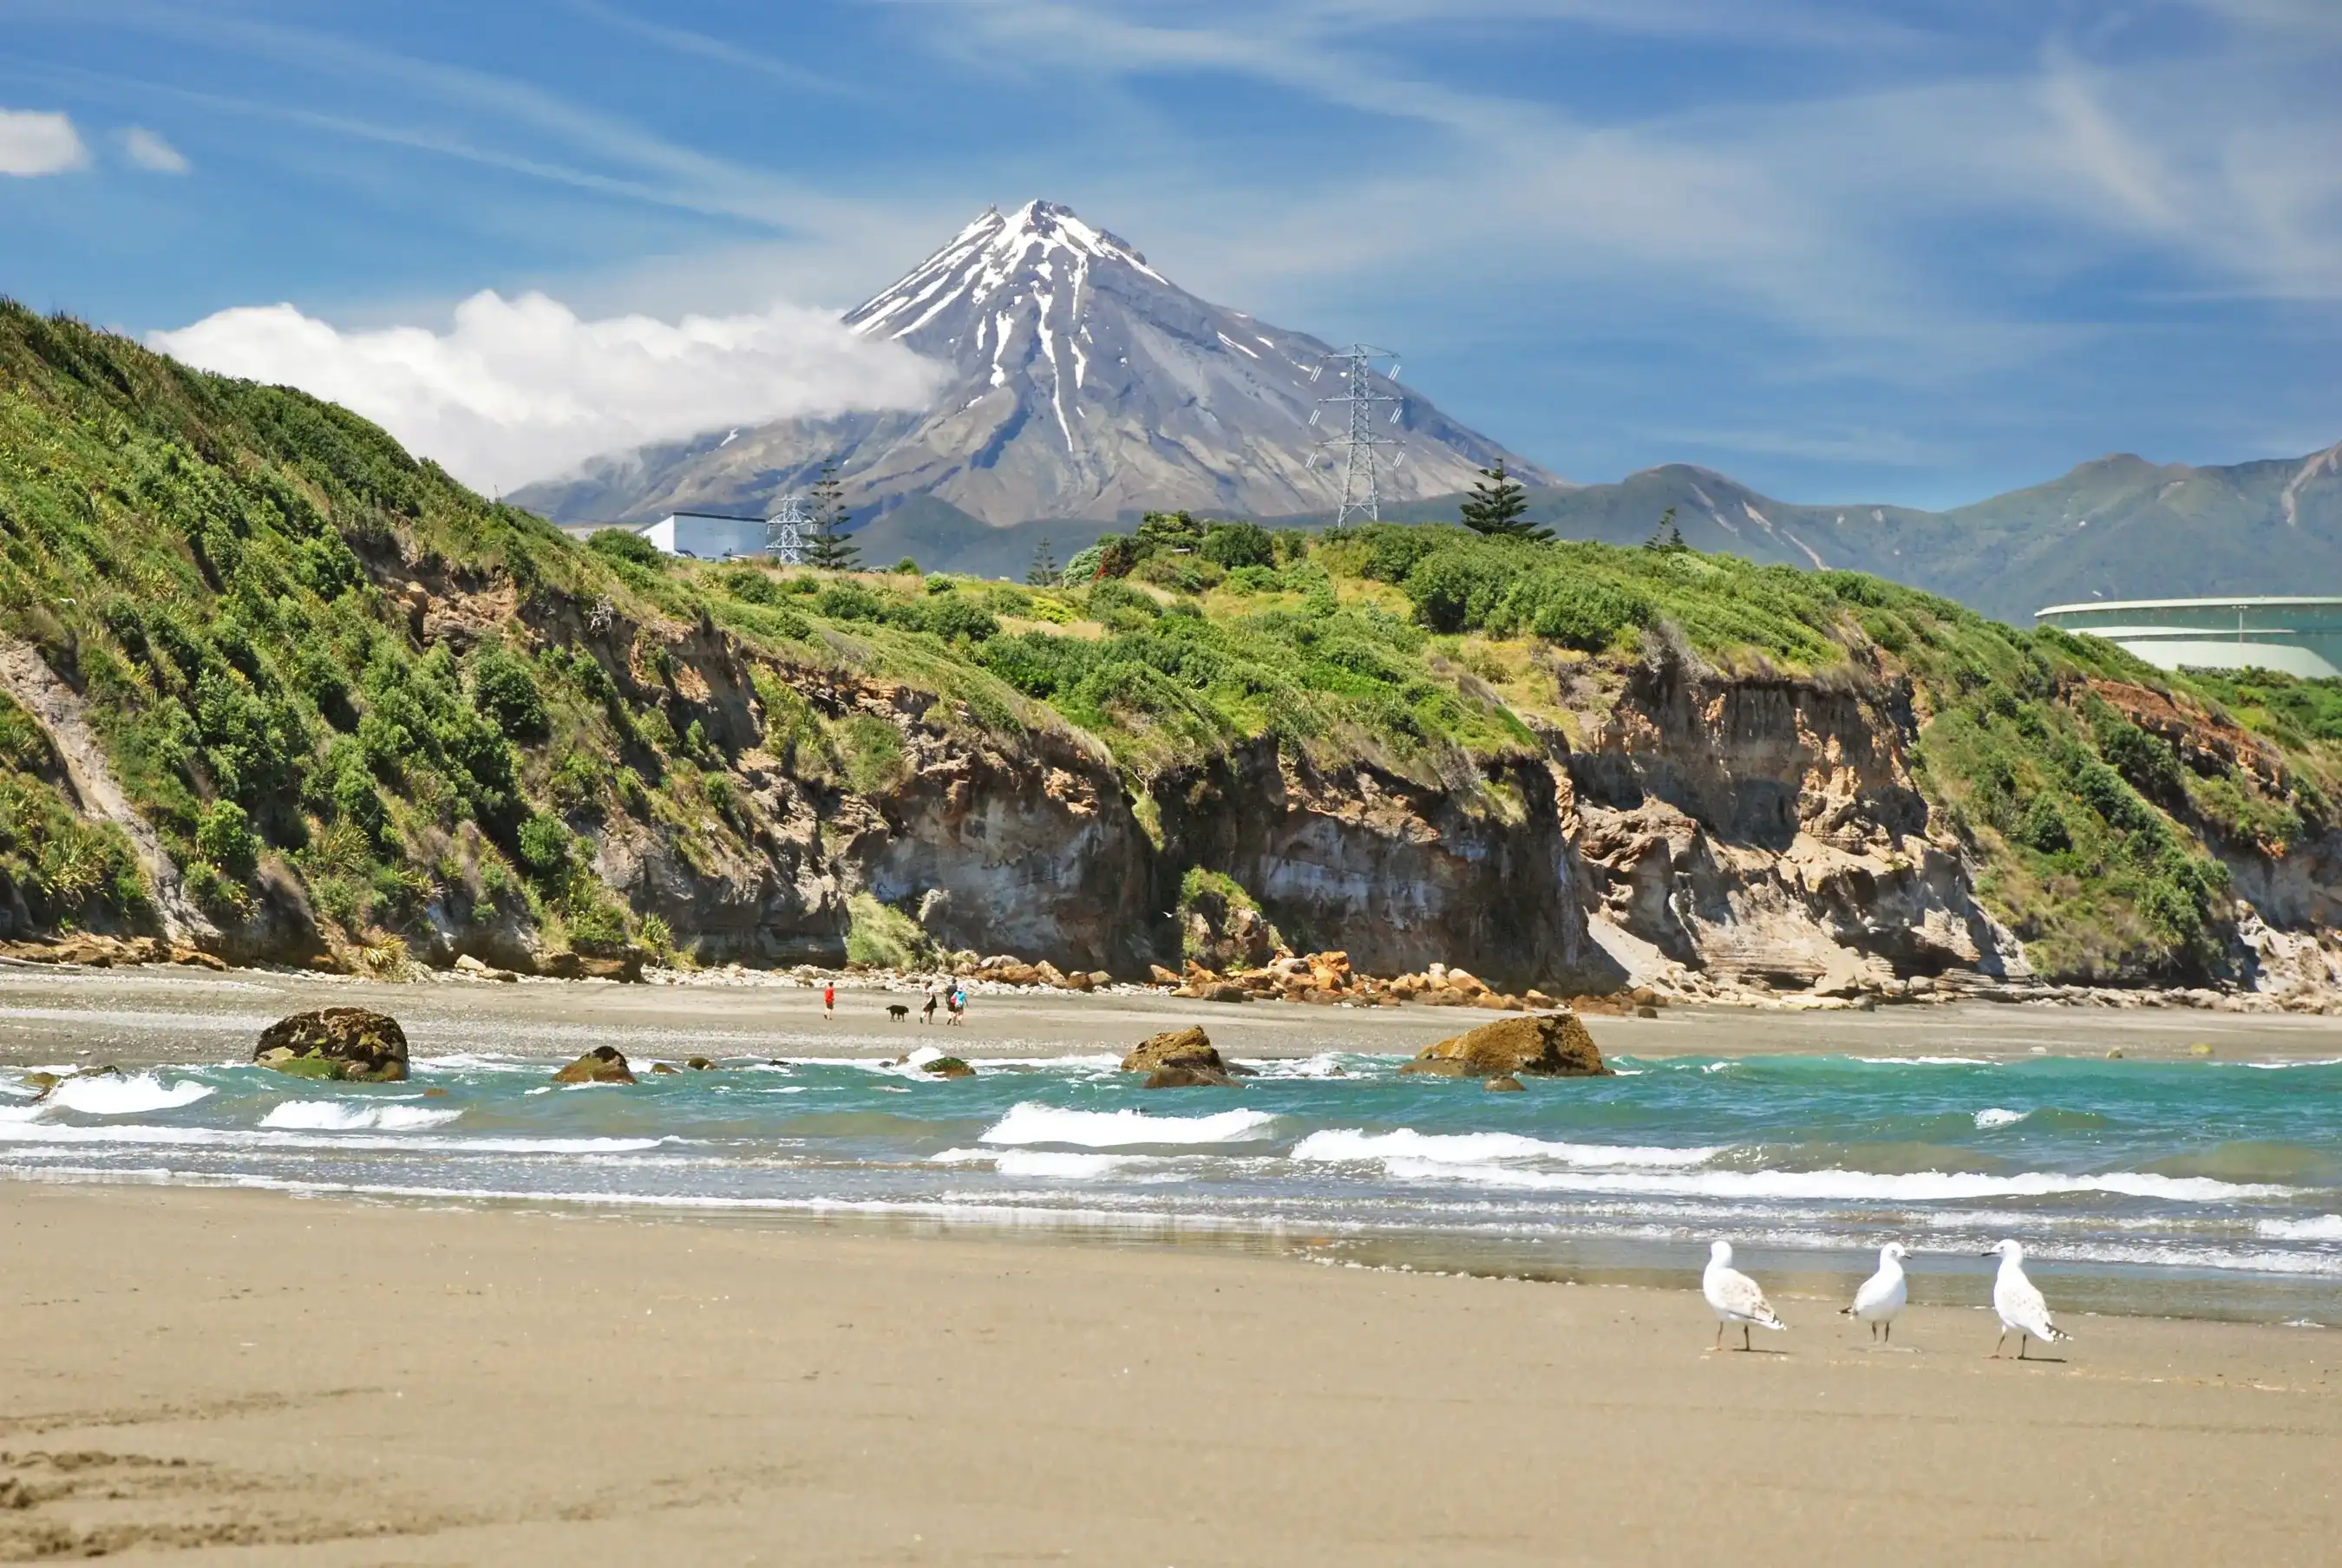 Beach in New Plymouth with Mt. Taranaki in the background, New Plymouth, New Zealand